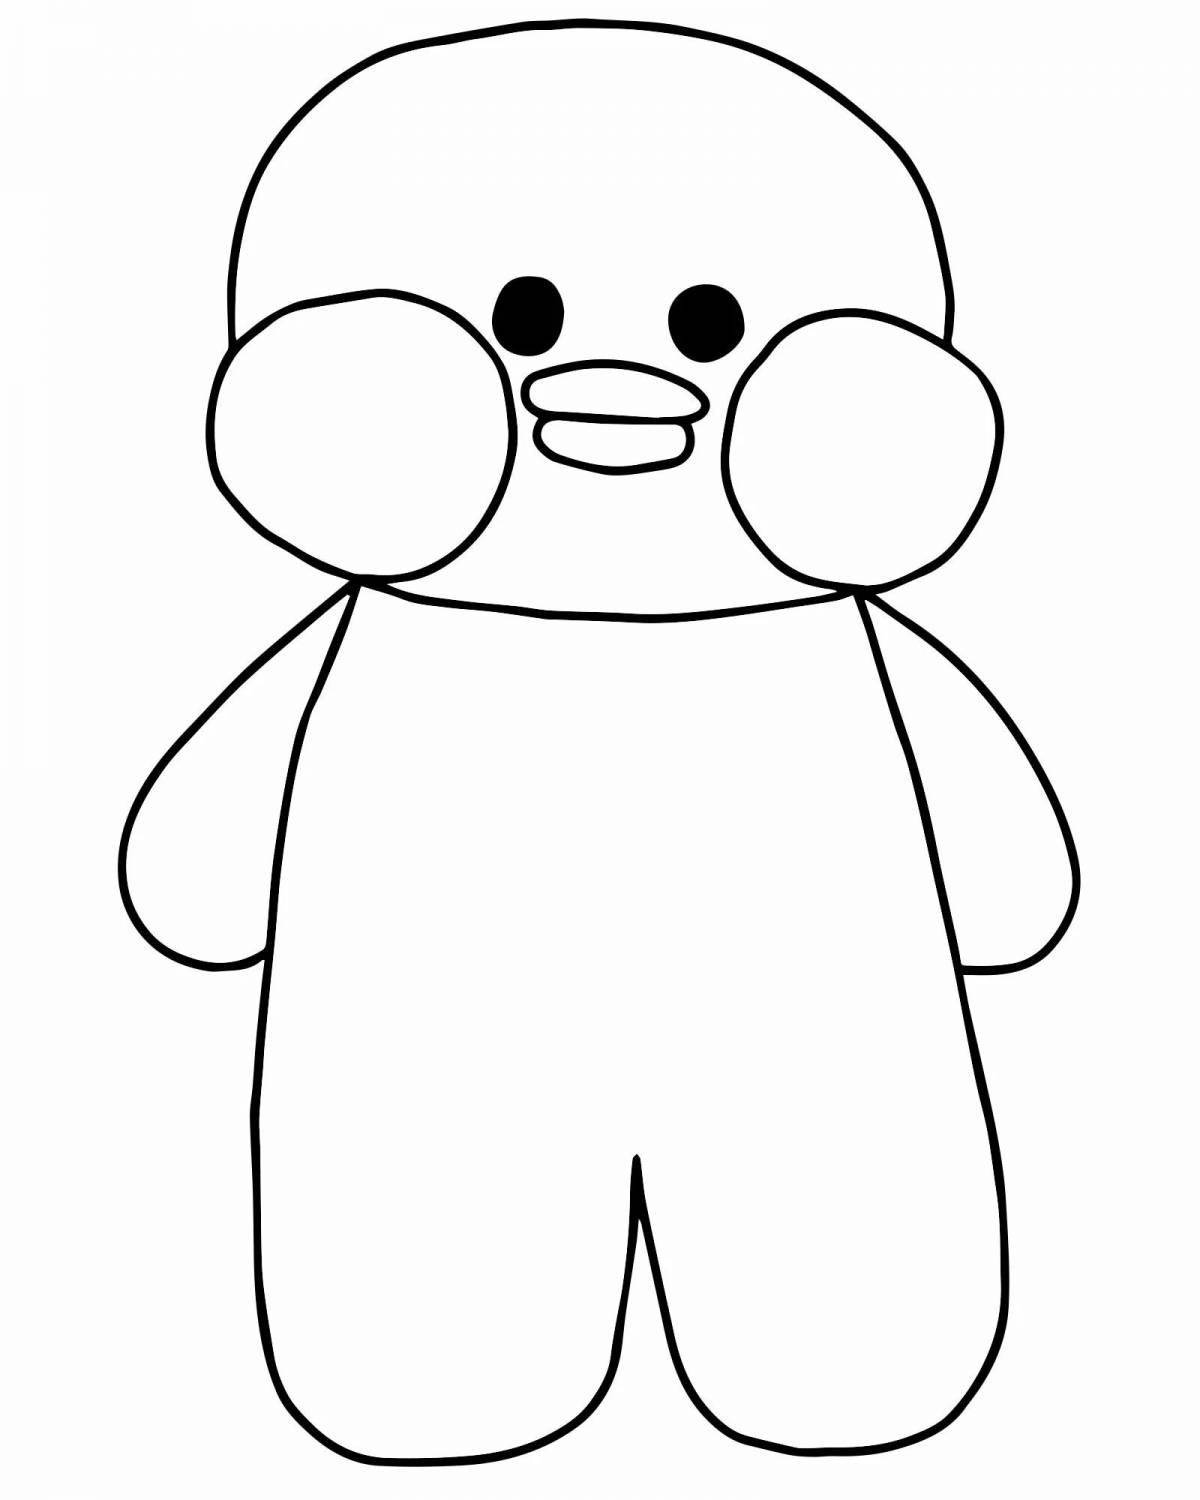 Paper duck coloring page